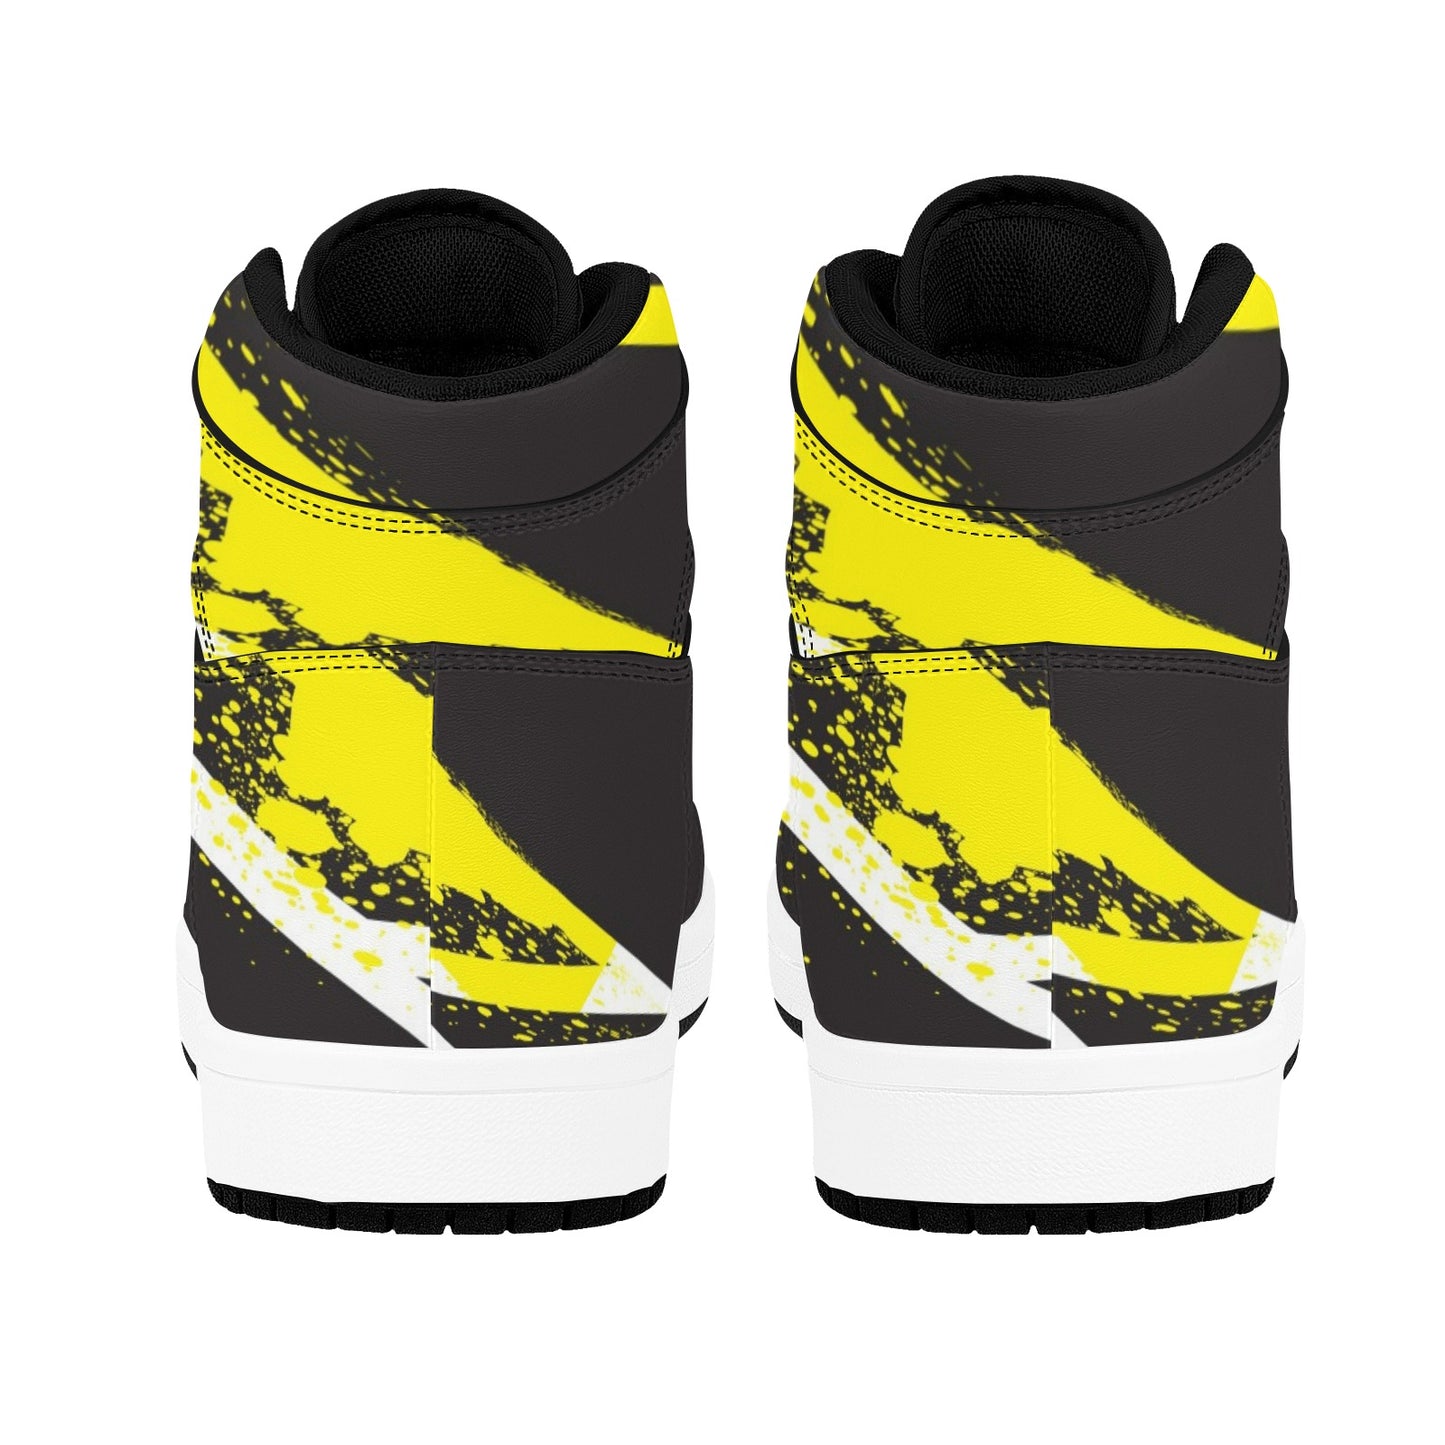 Black High Top Sneakers Yellow and White Stripes Hign Top Sneakers Men's High Top Sneakers